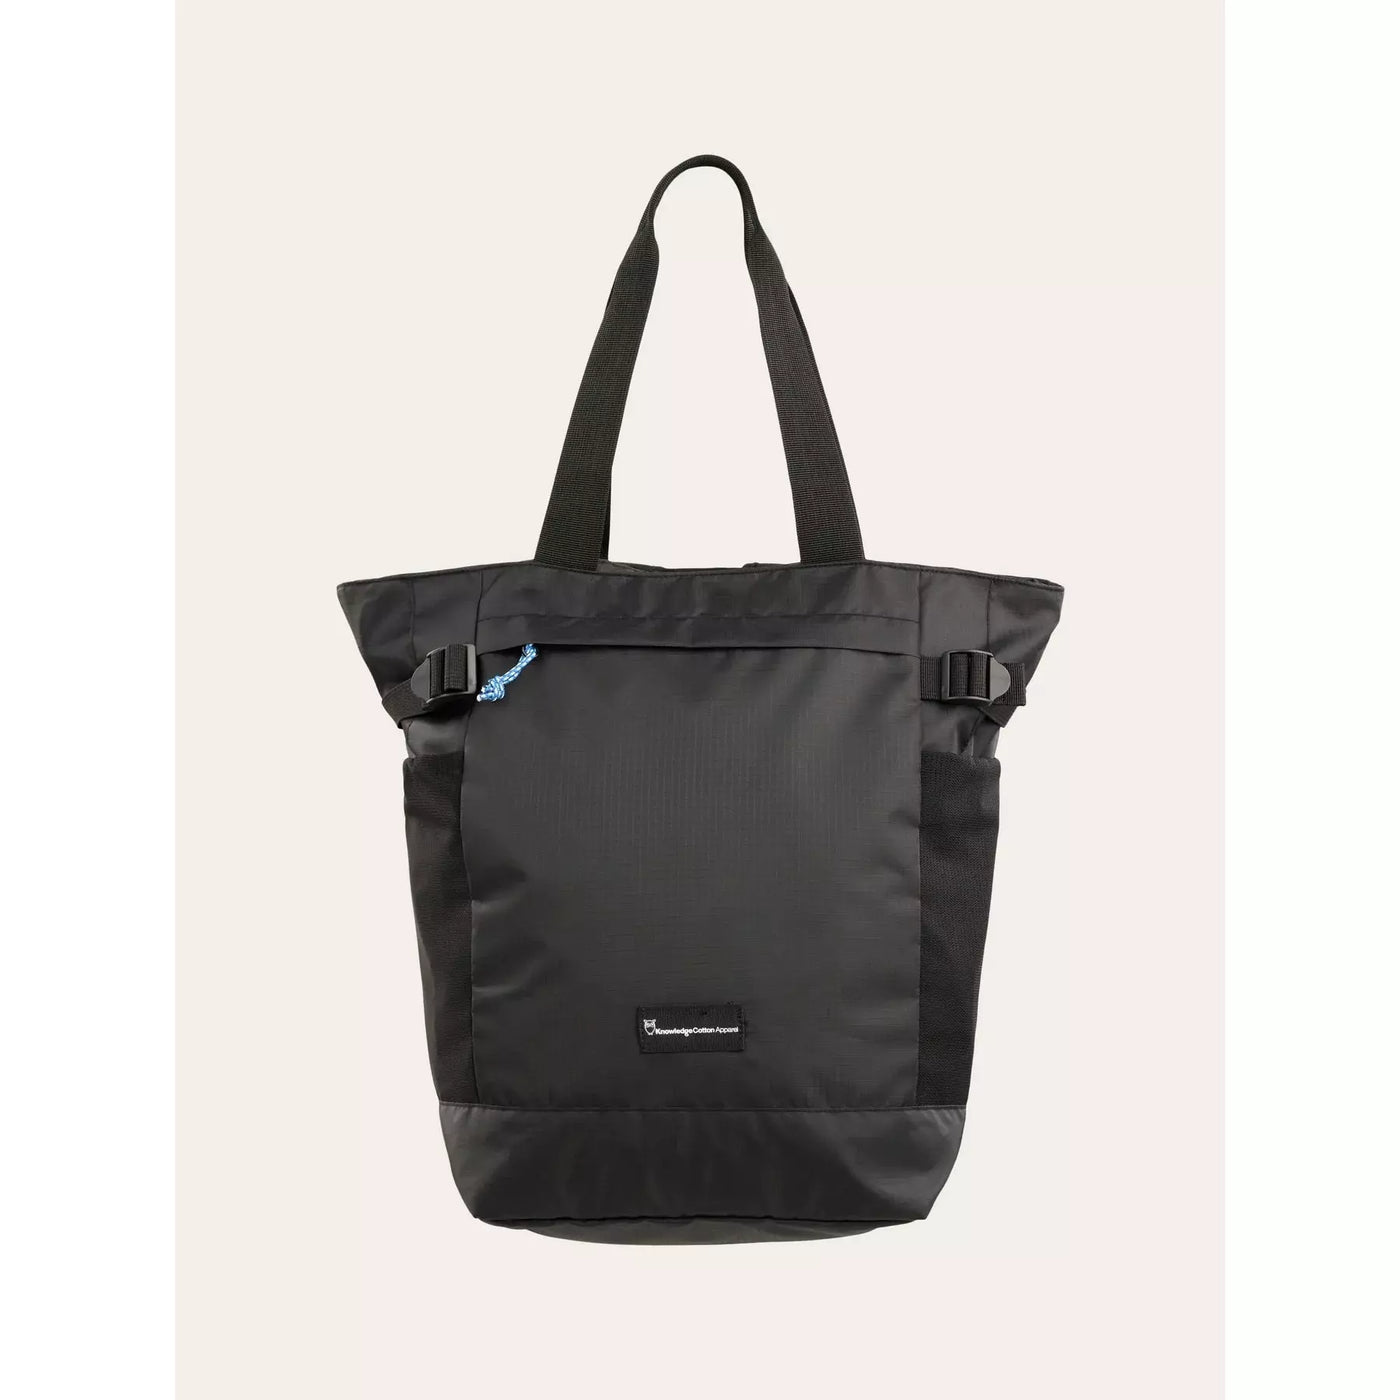 PACKABLE TOTE BACKPACK 25L